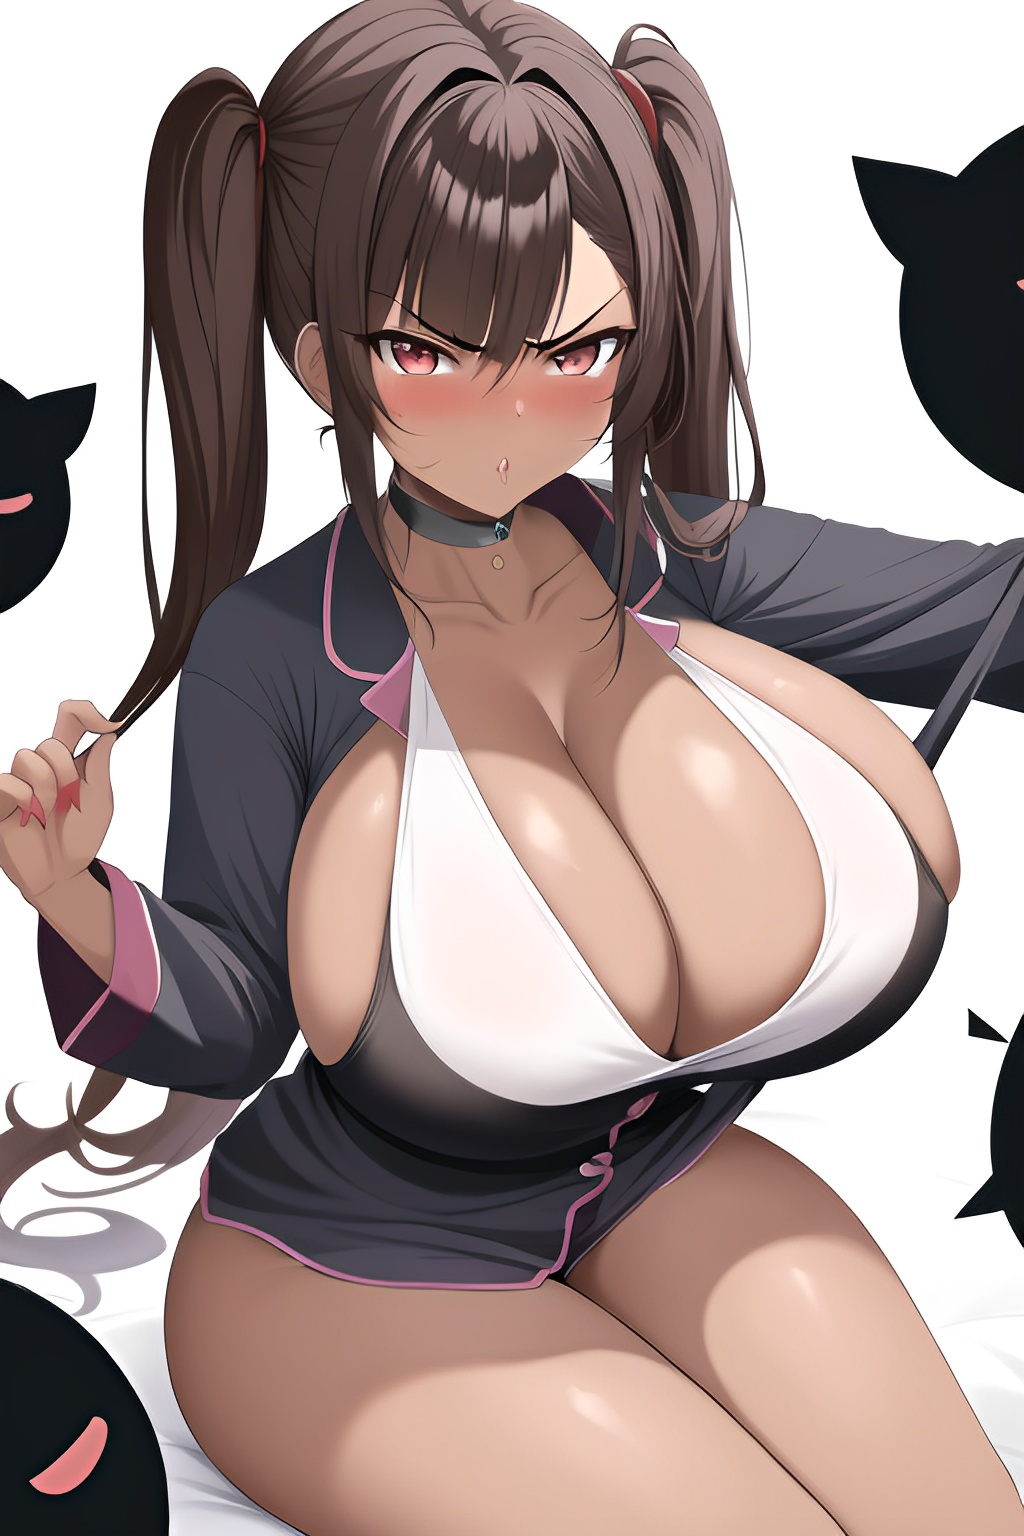 Anime Busty Huge Boobs 80s Age Angry Face Brunette Pigtails Hair Style Dark  Skin Painting Club Close Up View Jumping Pajamas - AI Hentai